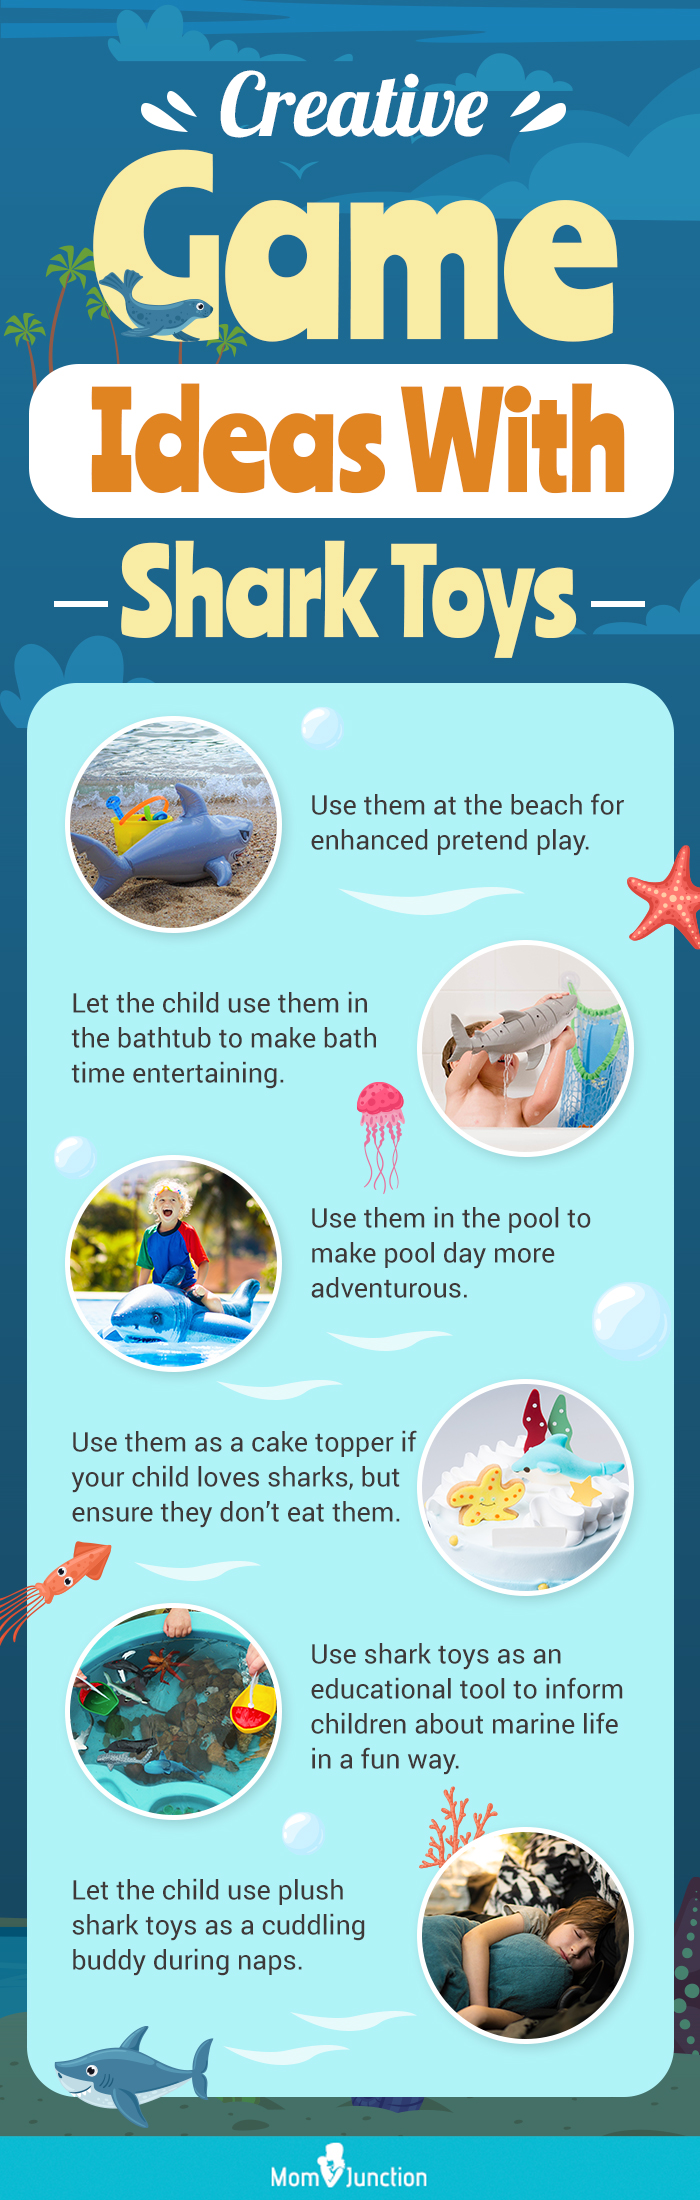 Creative Game Ideas With Shark Toys (infographic)